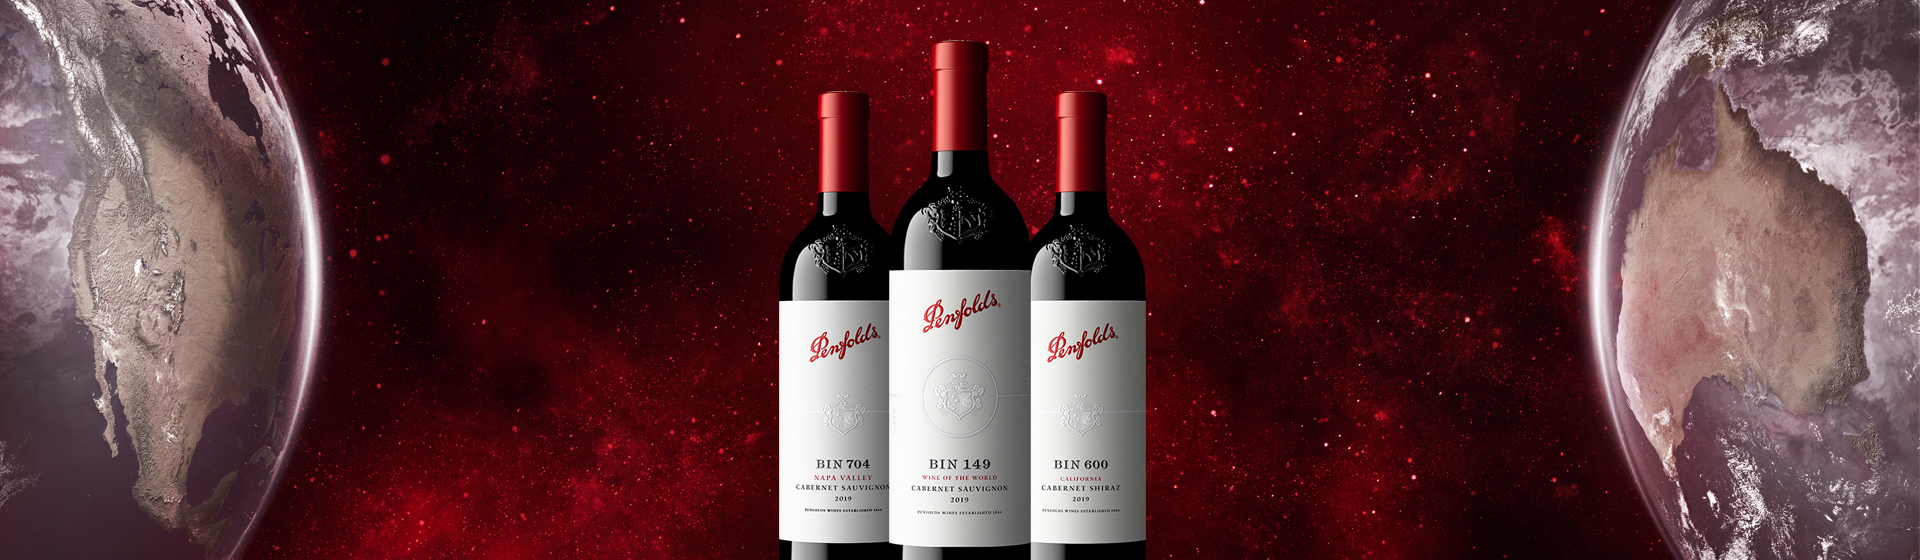 Three Penfolds bottles sit between two globes against a red galaxy background